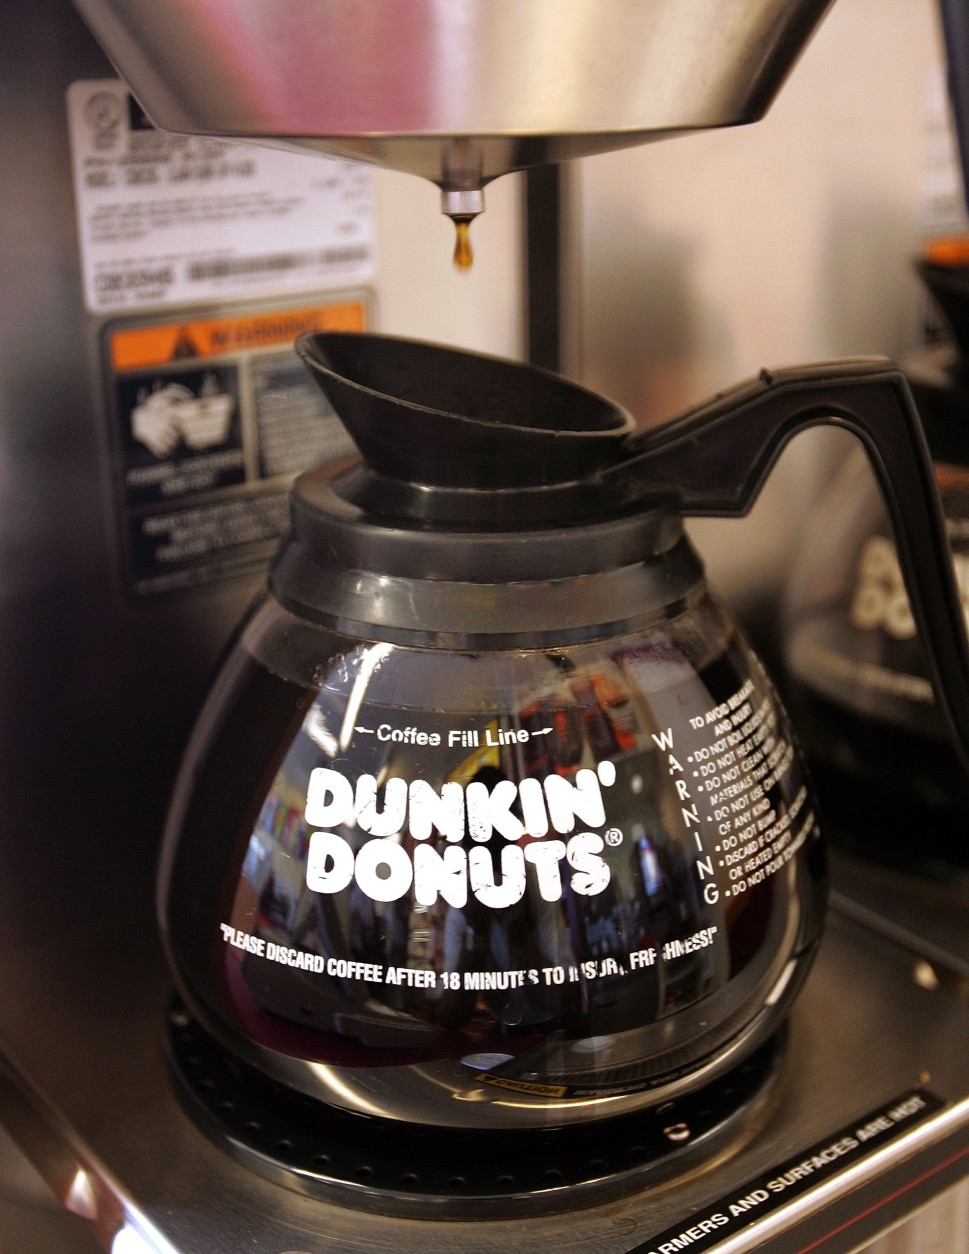 CHICAGO - SEPTEMBER 07:   Coffee drips into a pot at a Dunkin' Donuts store September 7, 2006 in Chicago, Illinois. In an effort to compete with Starbucks in the lucrative coffee market, Dunkin? Donuts has announced a goal of opening more than 10,000 new stores in the U.S. by 2020.  (Photo by Tim Boyle/Getty Images)